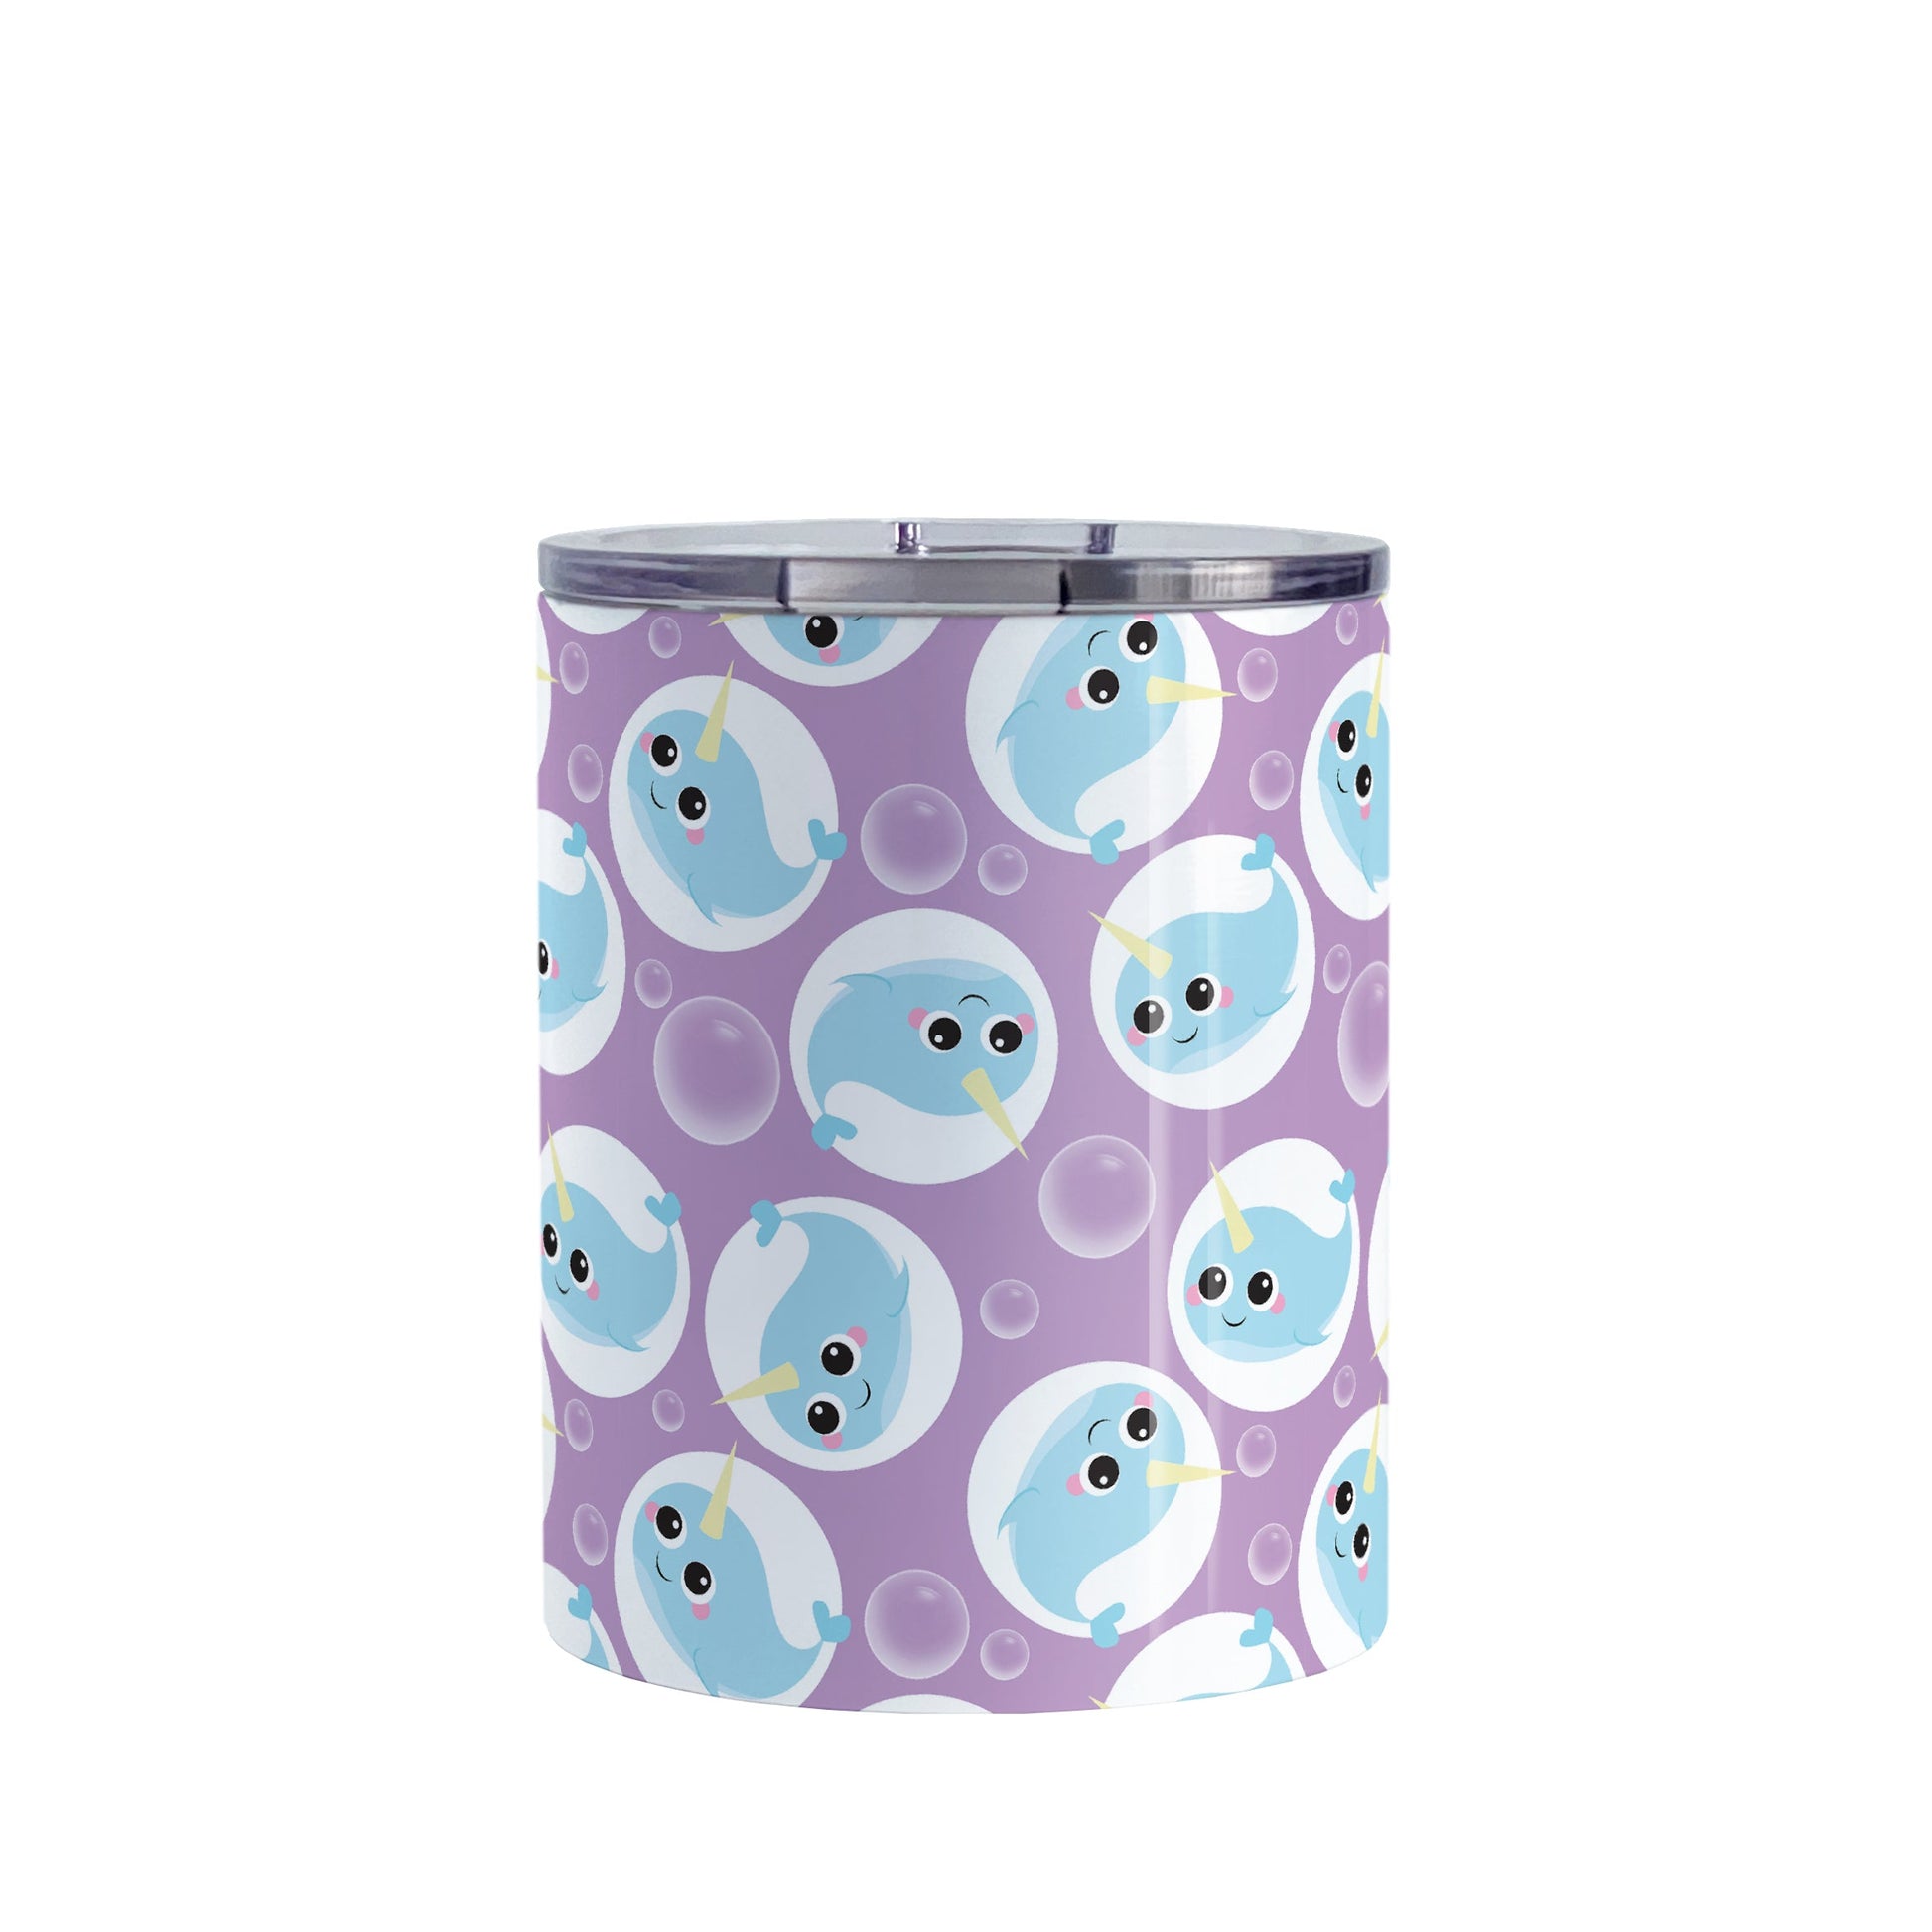 Cute Purple Narwhal Bubble Pattern Tumbler Cup (10oz, stainless steel insulated) at Amy's Coffee Mugs